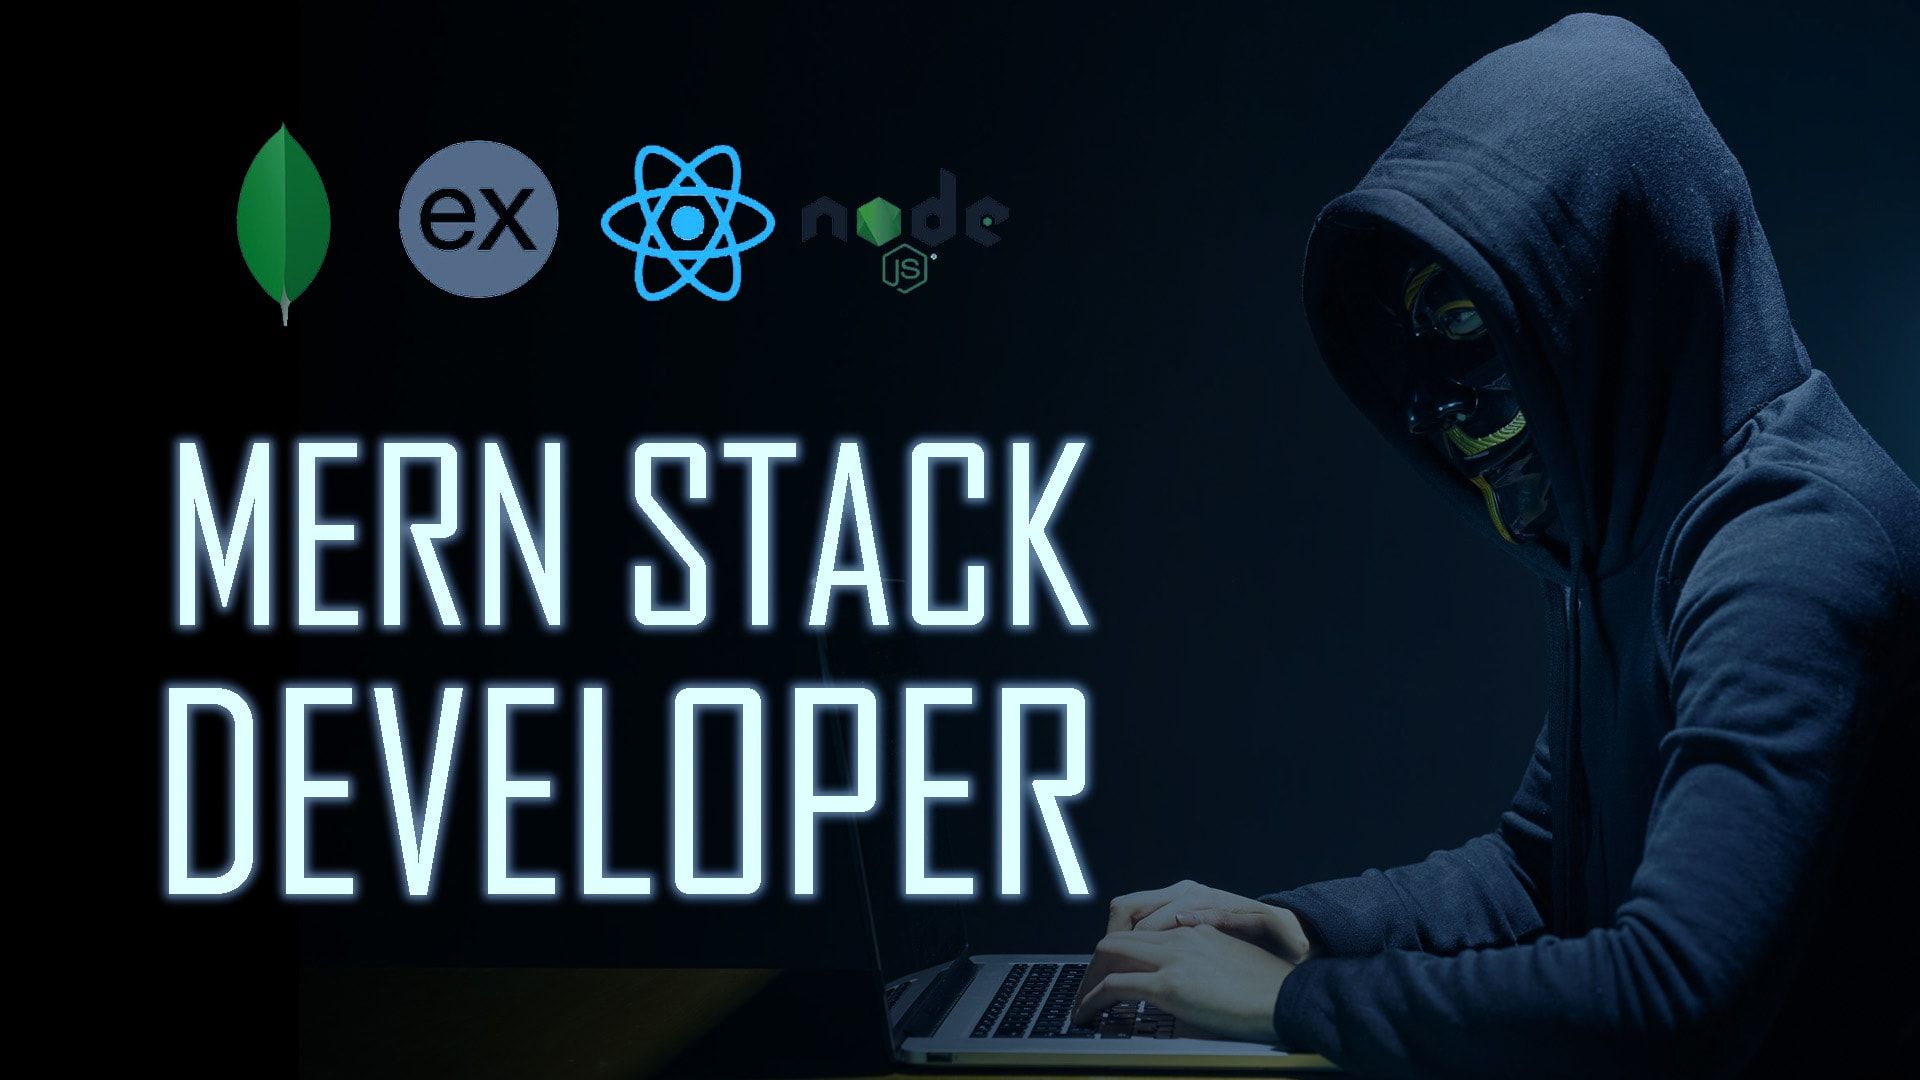 Be your awesome mern stack developer